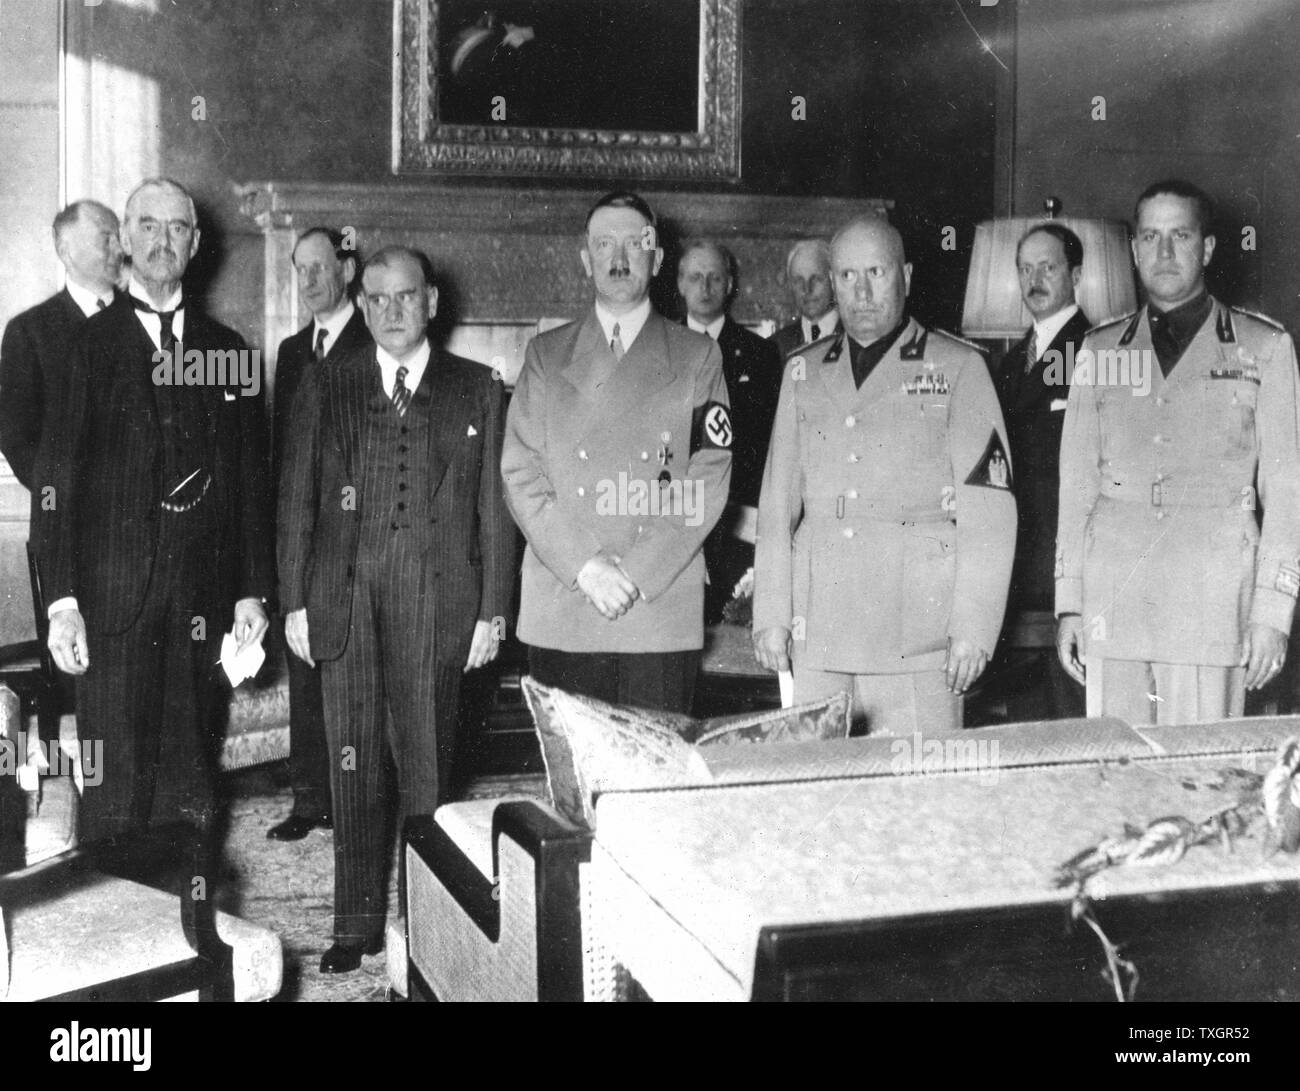 Munich, September 1938, Peace Conference Left to right: Neville Chamberlain (Britain) Edouard Daladier (France) Adolph Hitler (Germany) Benito Mussolini (Italy) and Count Ciano (Italy) Stock Photo